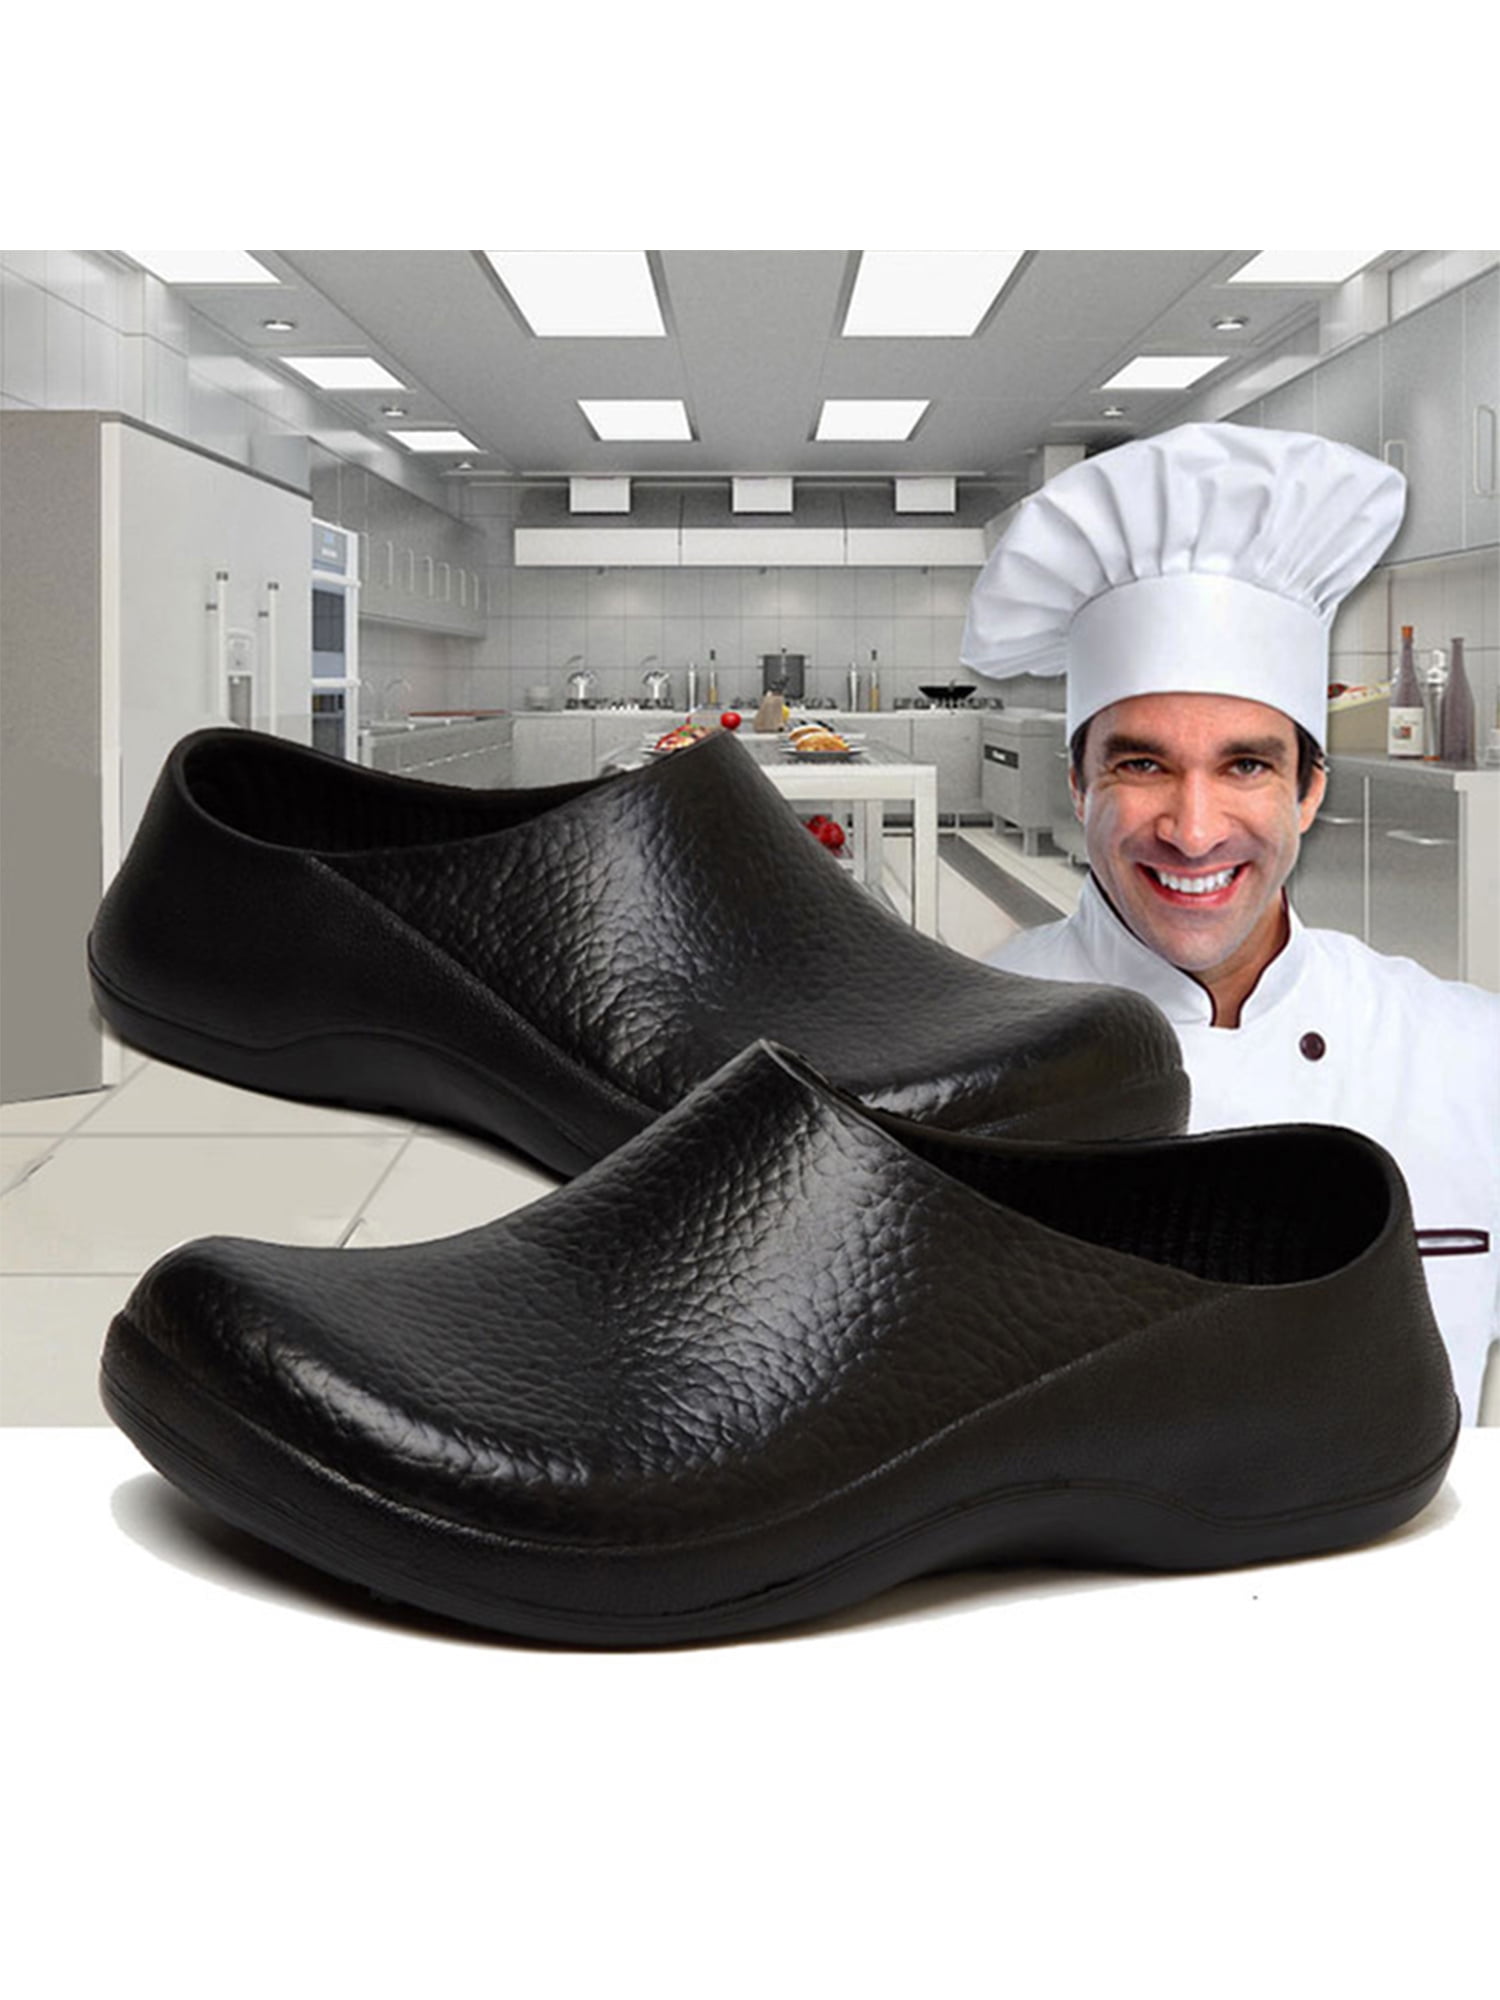 Womens and Mens Slip Resistant Work Shoes Comfort Slip on Chef or Nursing Shoes 